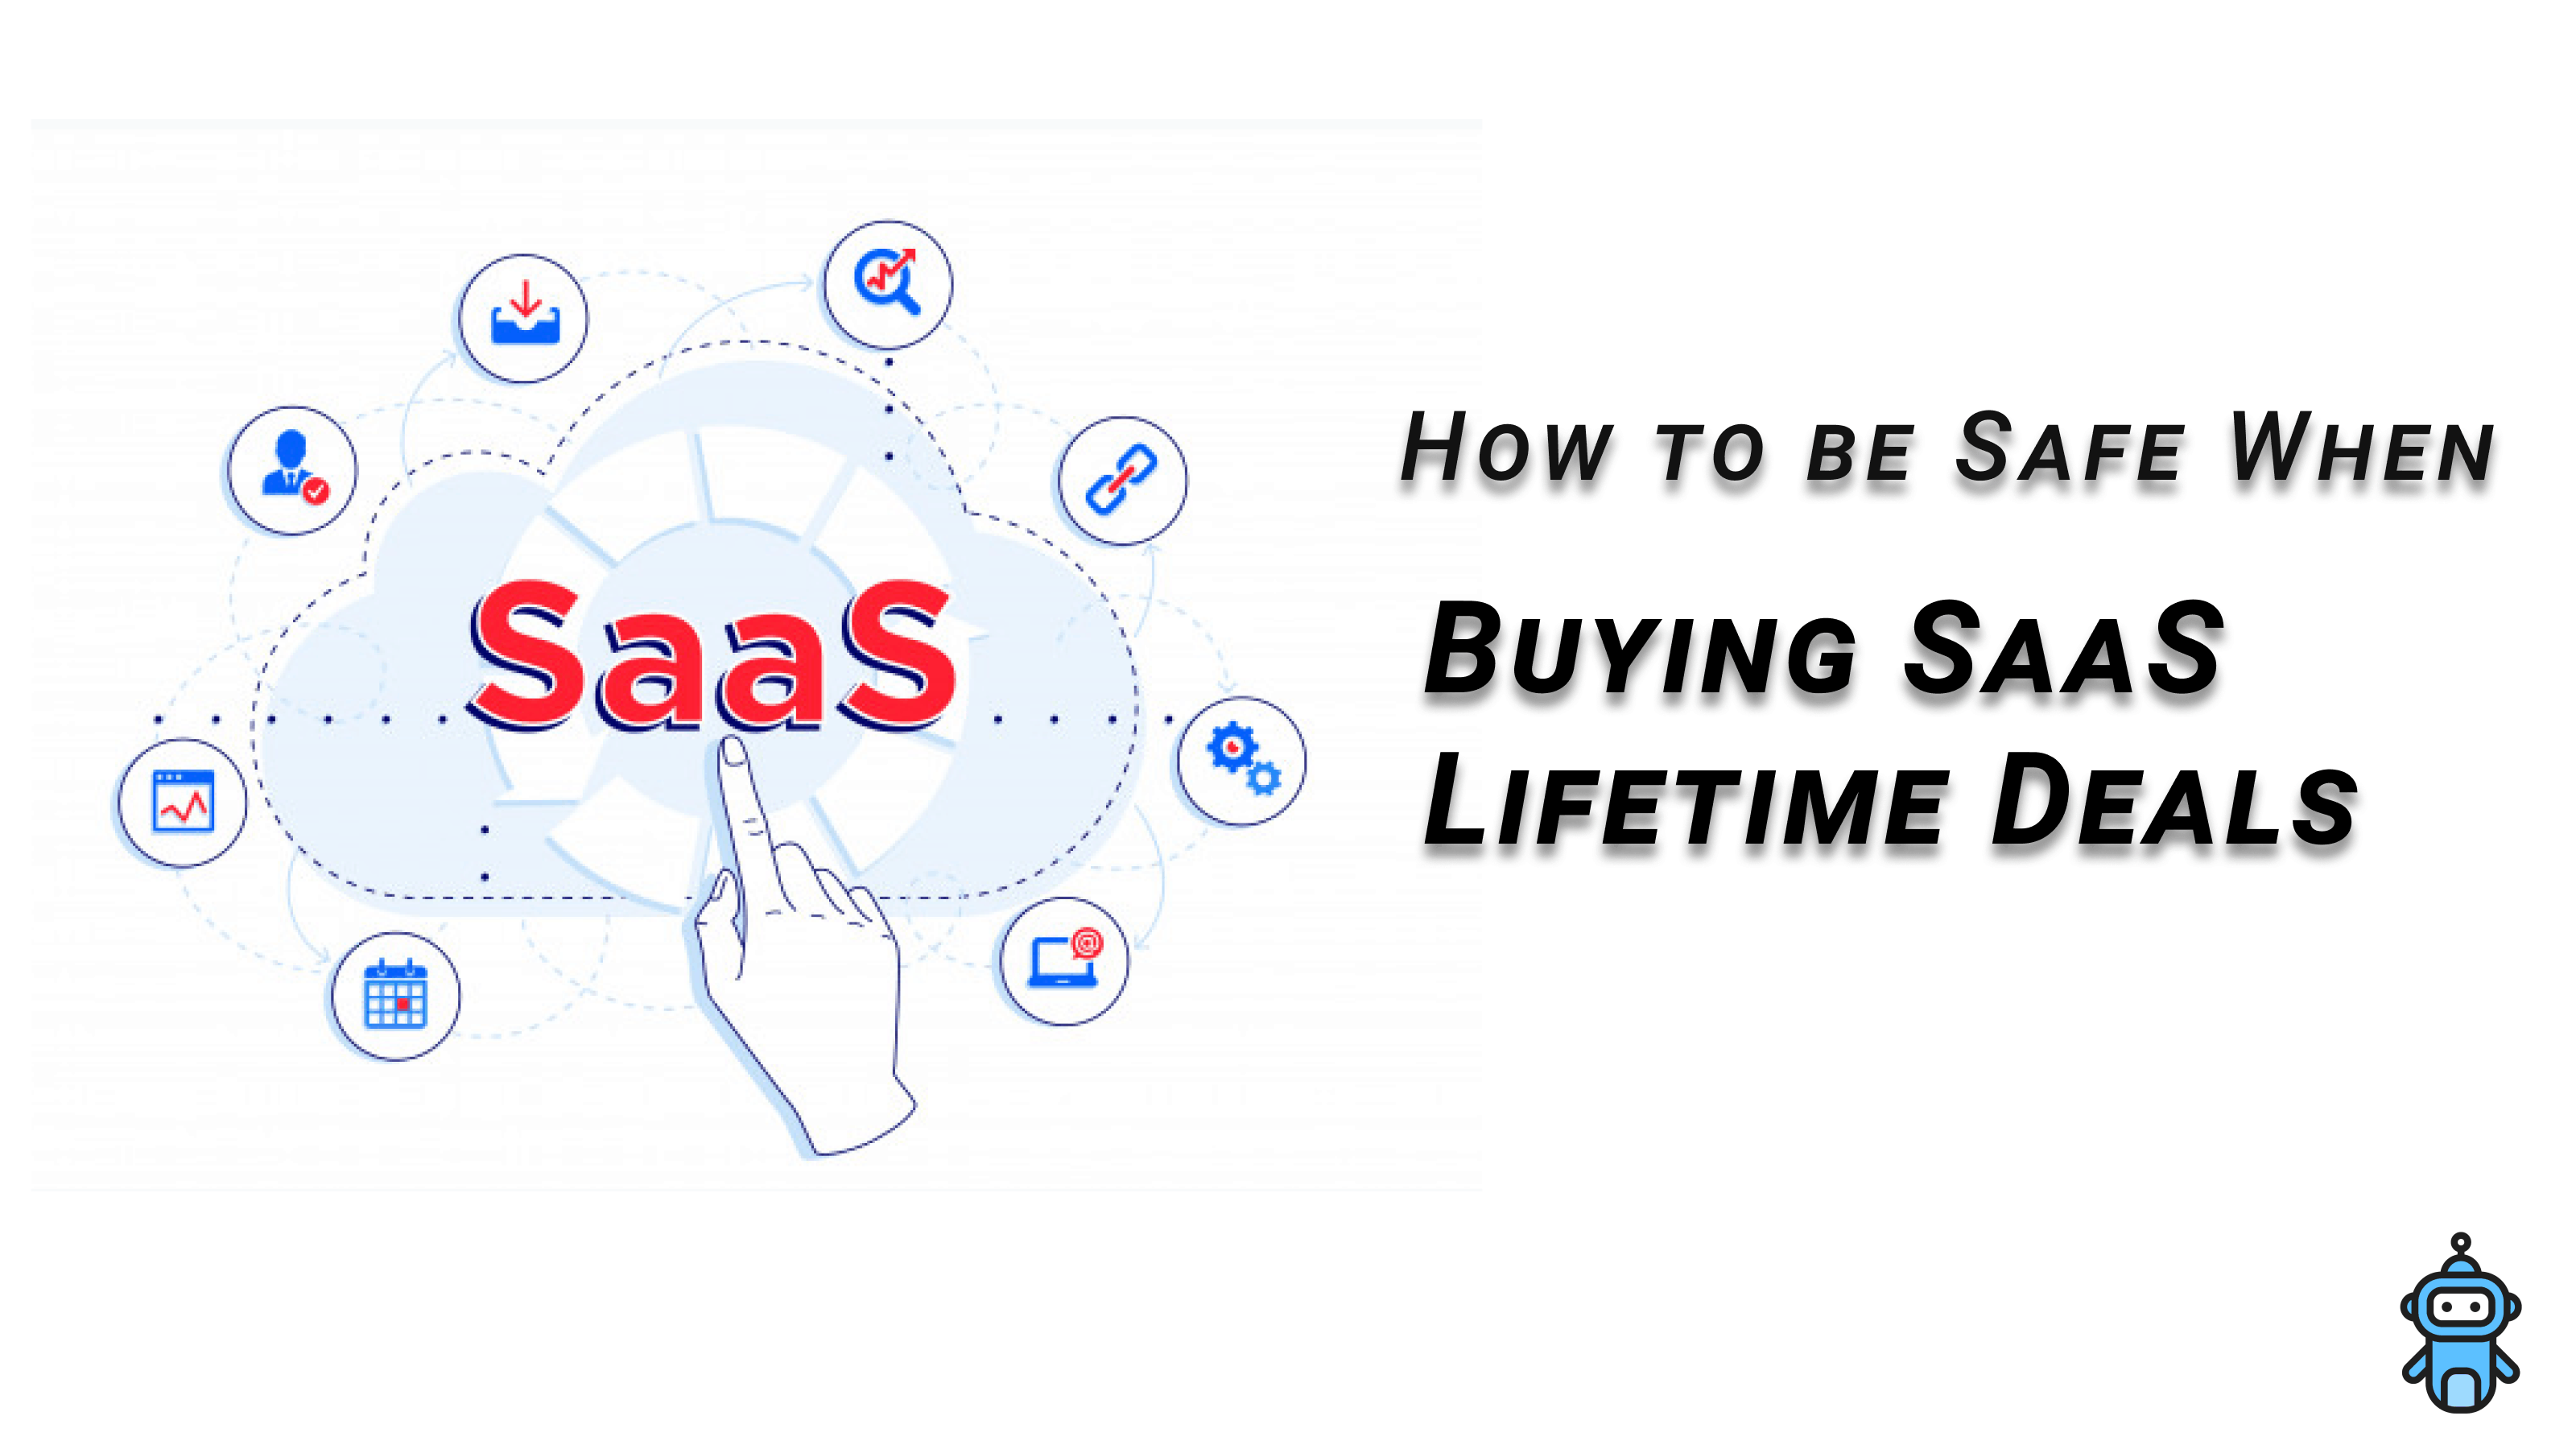 How to be Safe When Buying SaaS Lifetime Deals